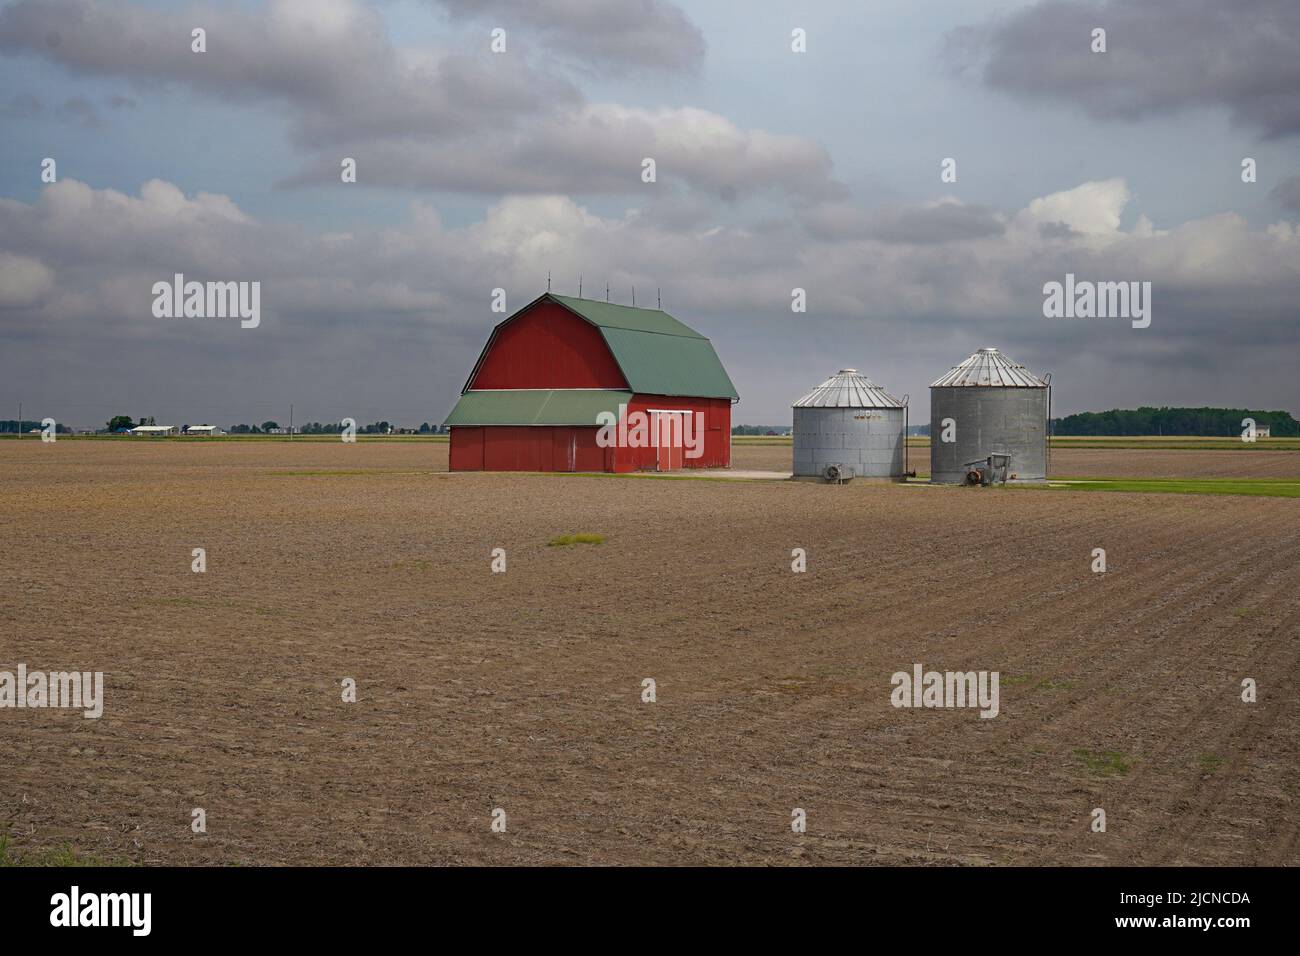 Agricultural scene with a red barn and two silos surrounded by a freshly plowed field in Ohio Stock Photo